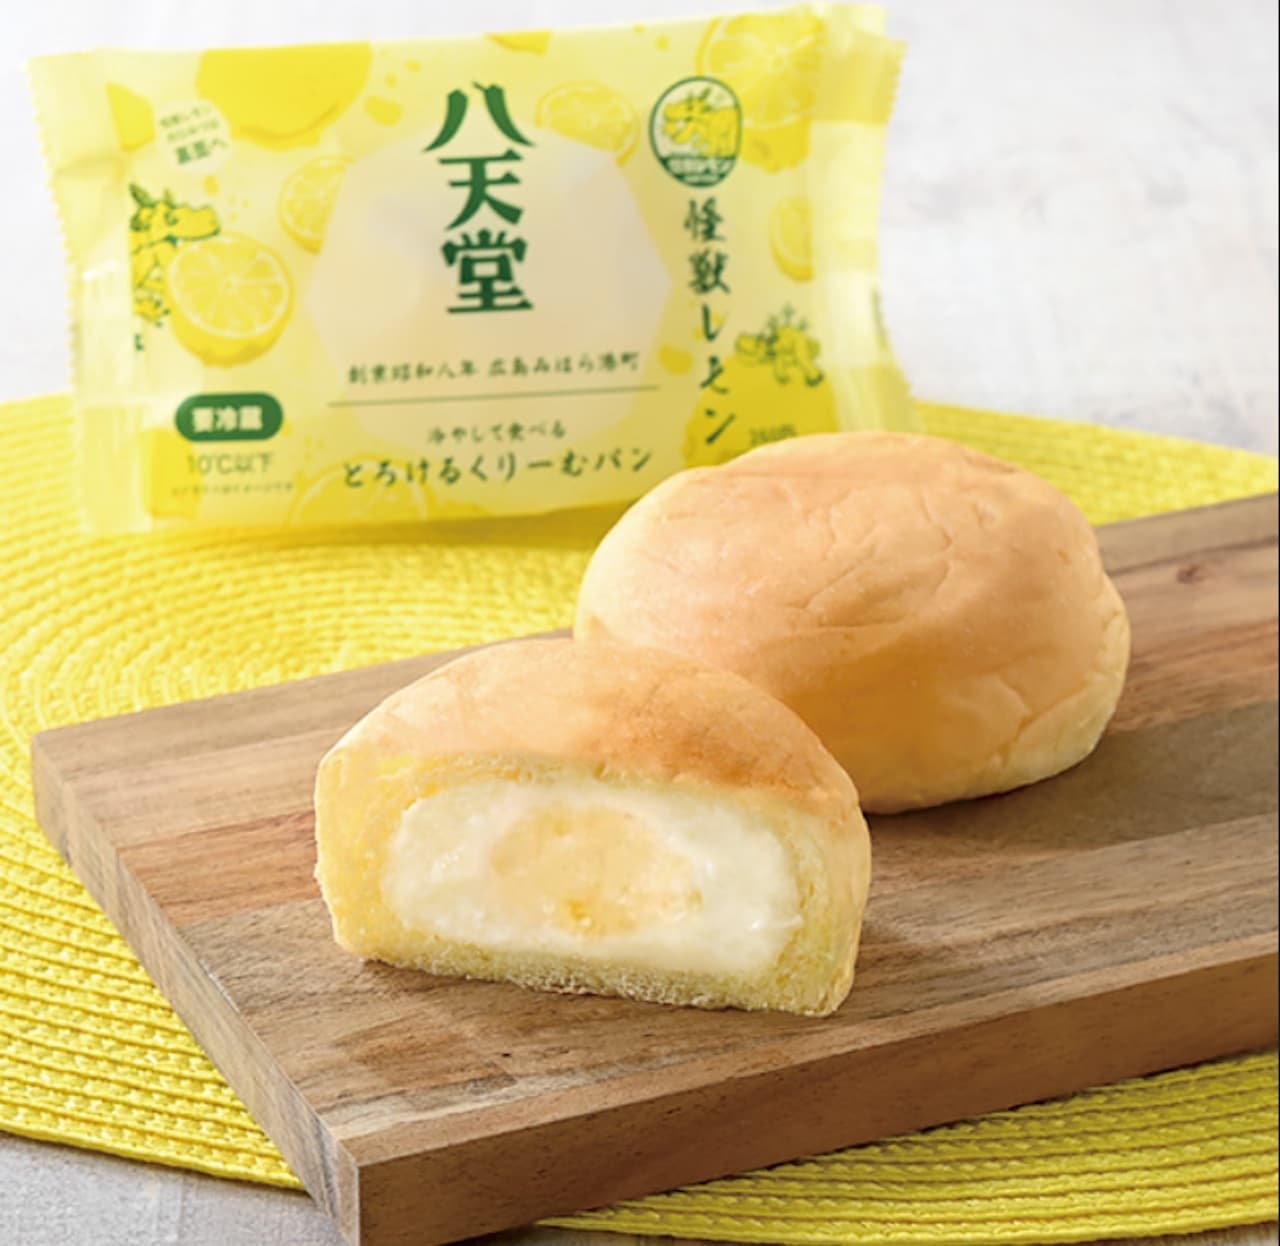 Hattendo "Chilled Melted Creamy Buns with Monster Lemon